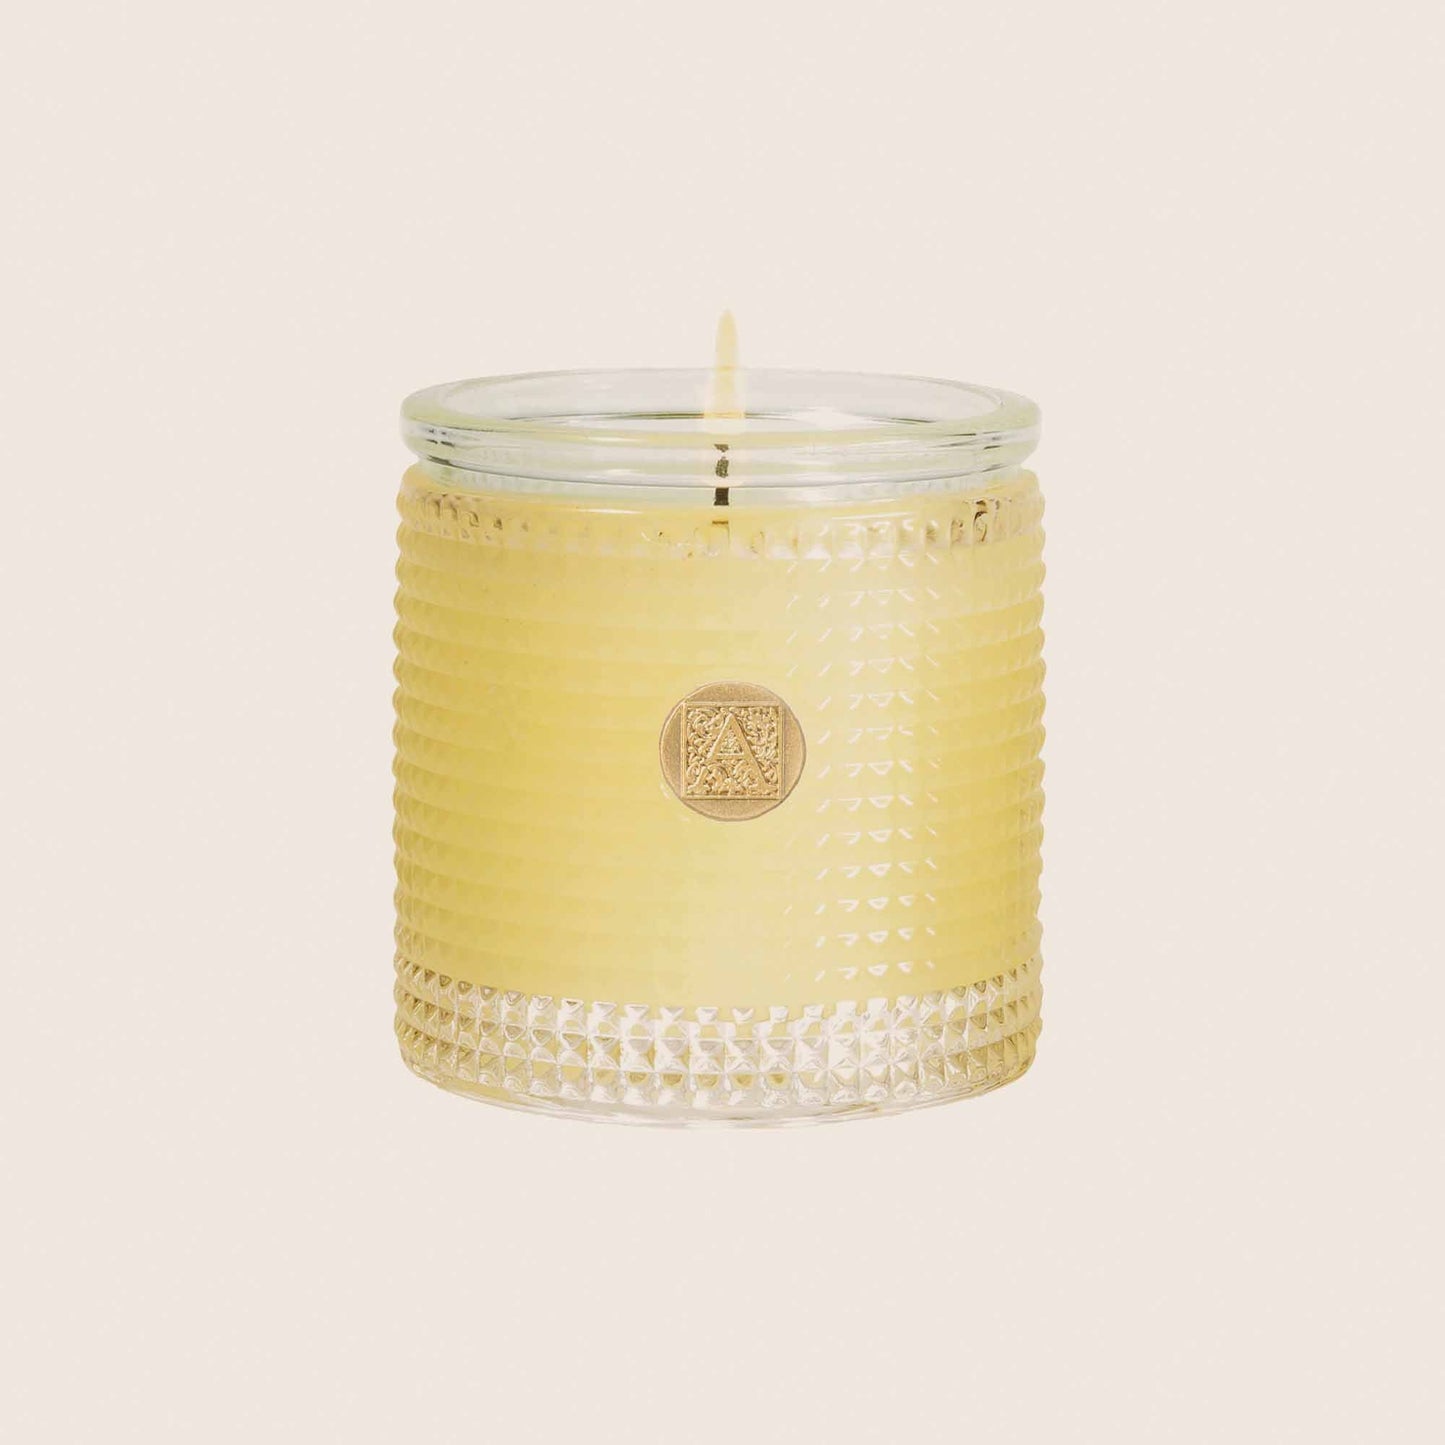 Orange and Evergreen Textured Glass Candle